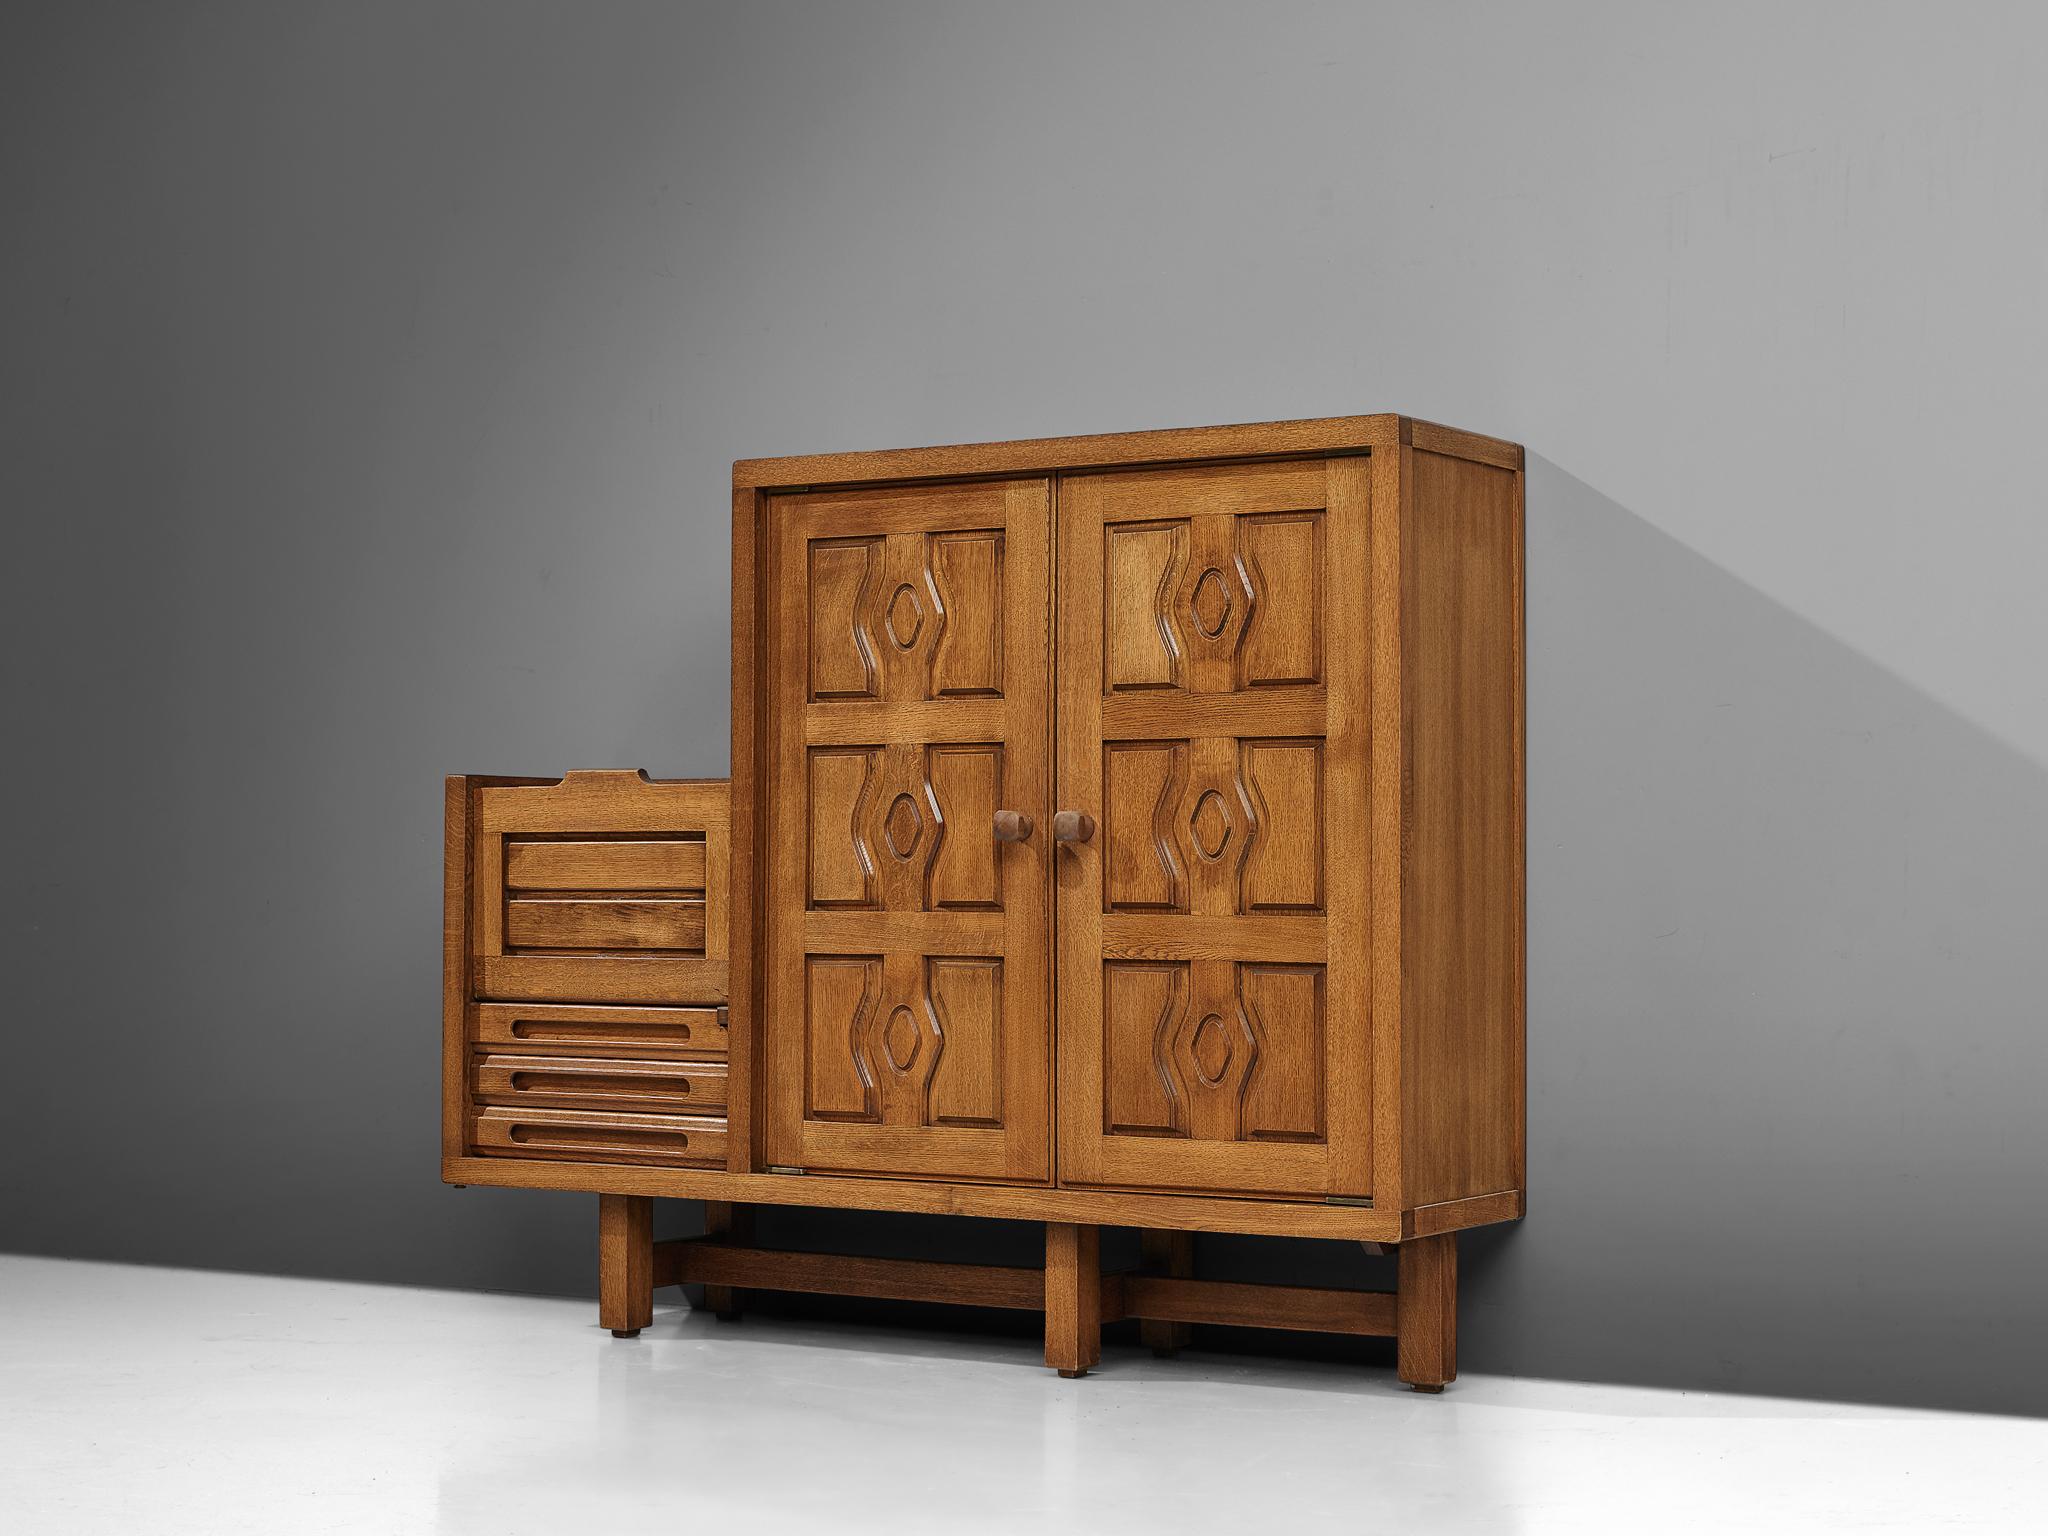 Guillerme et Chambron for Votre Maison, cabinet, model 'Thierry', oak, France, 1960s

This 'Thierry' case piece is created by Guillerme and Chambron. The design is characterized by a sophisticated composition created by means of the arrangement of